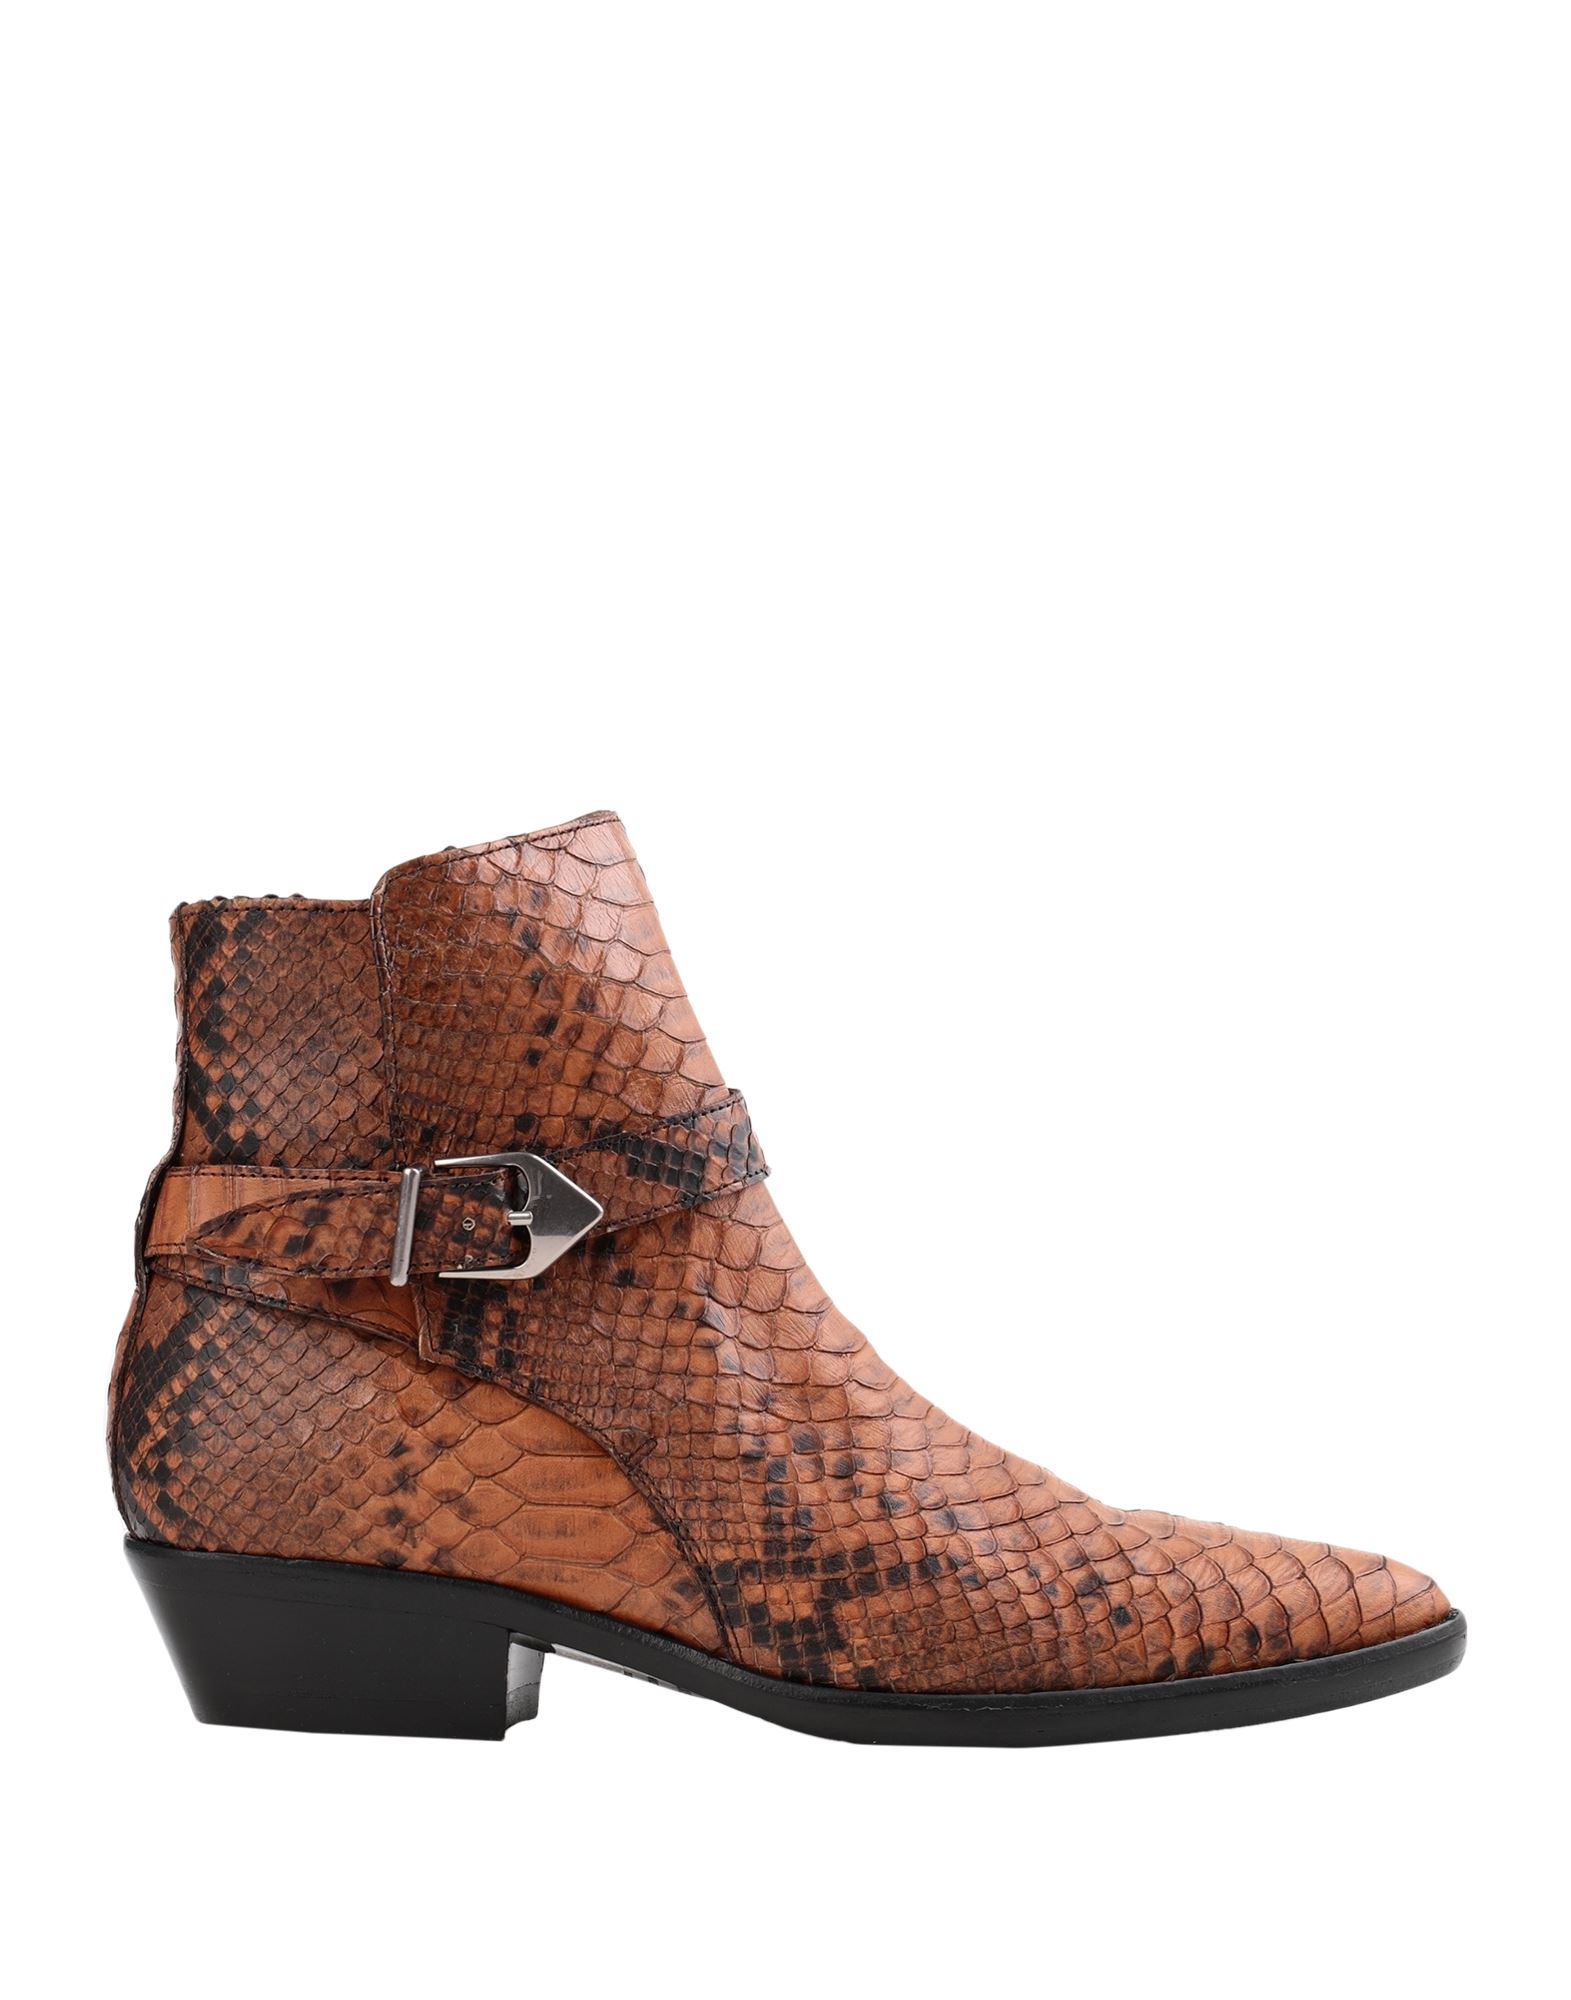 ISABEL MARANT Ankle boots - Item 11972270